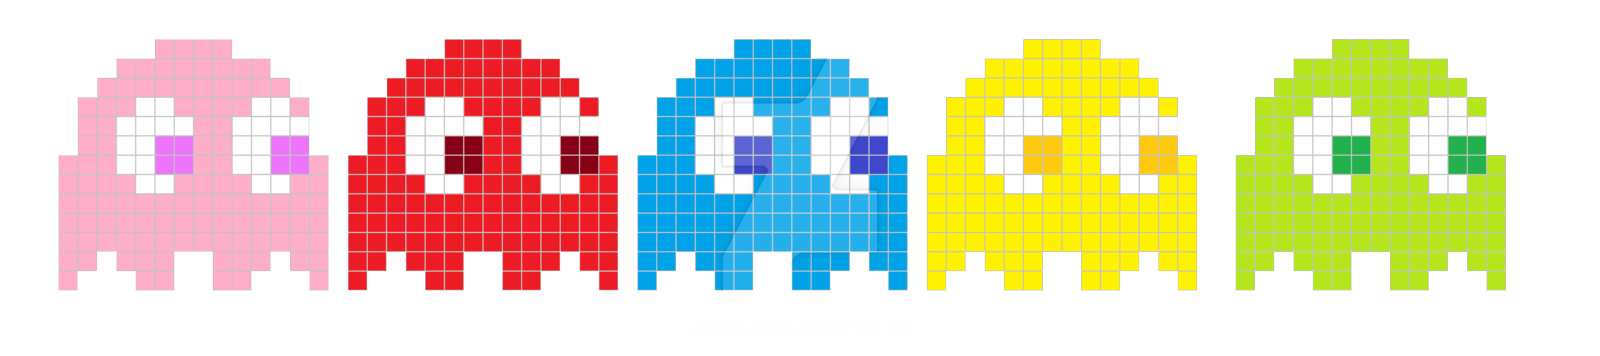 PAC-MAN Ghost PNG Photos